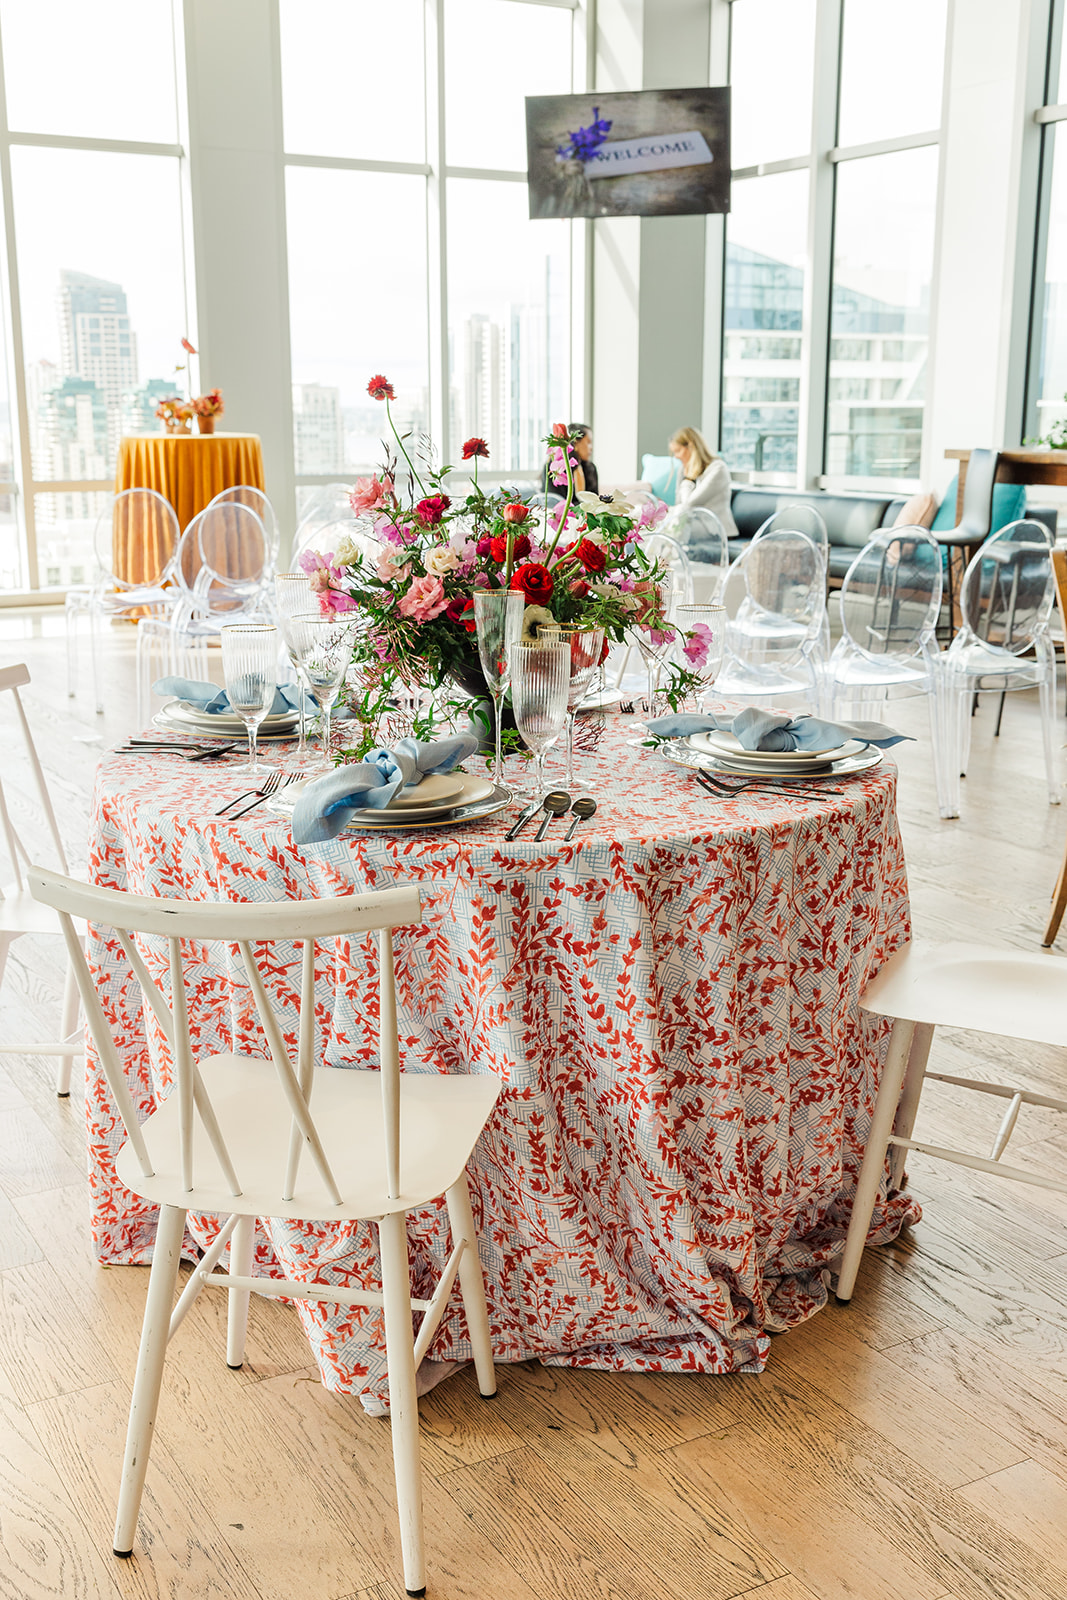 Linens by BBJ La Tavola, decore by Bright and TBD, florals and center pieces by Parker and Posies